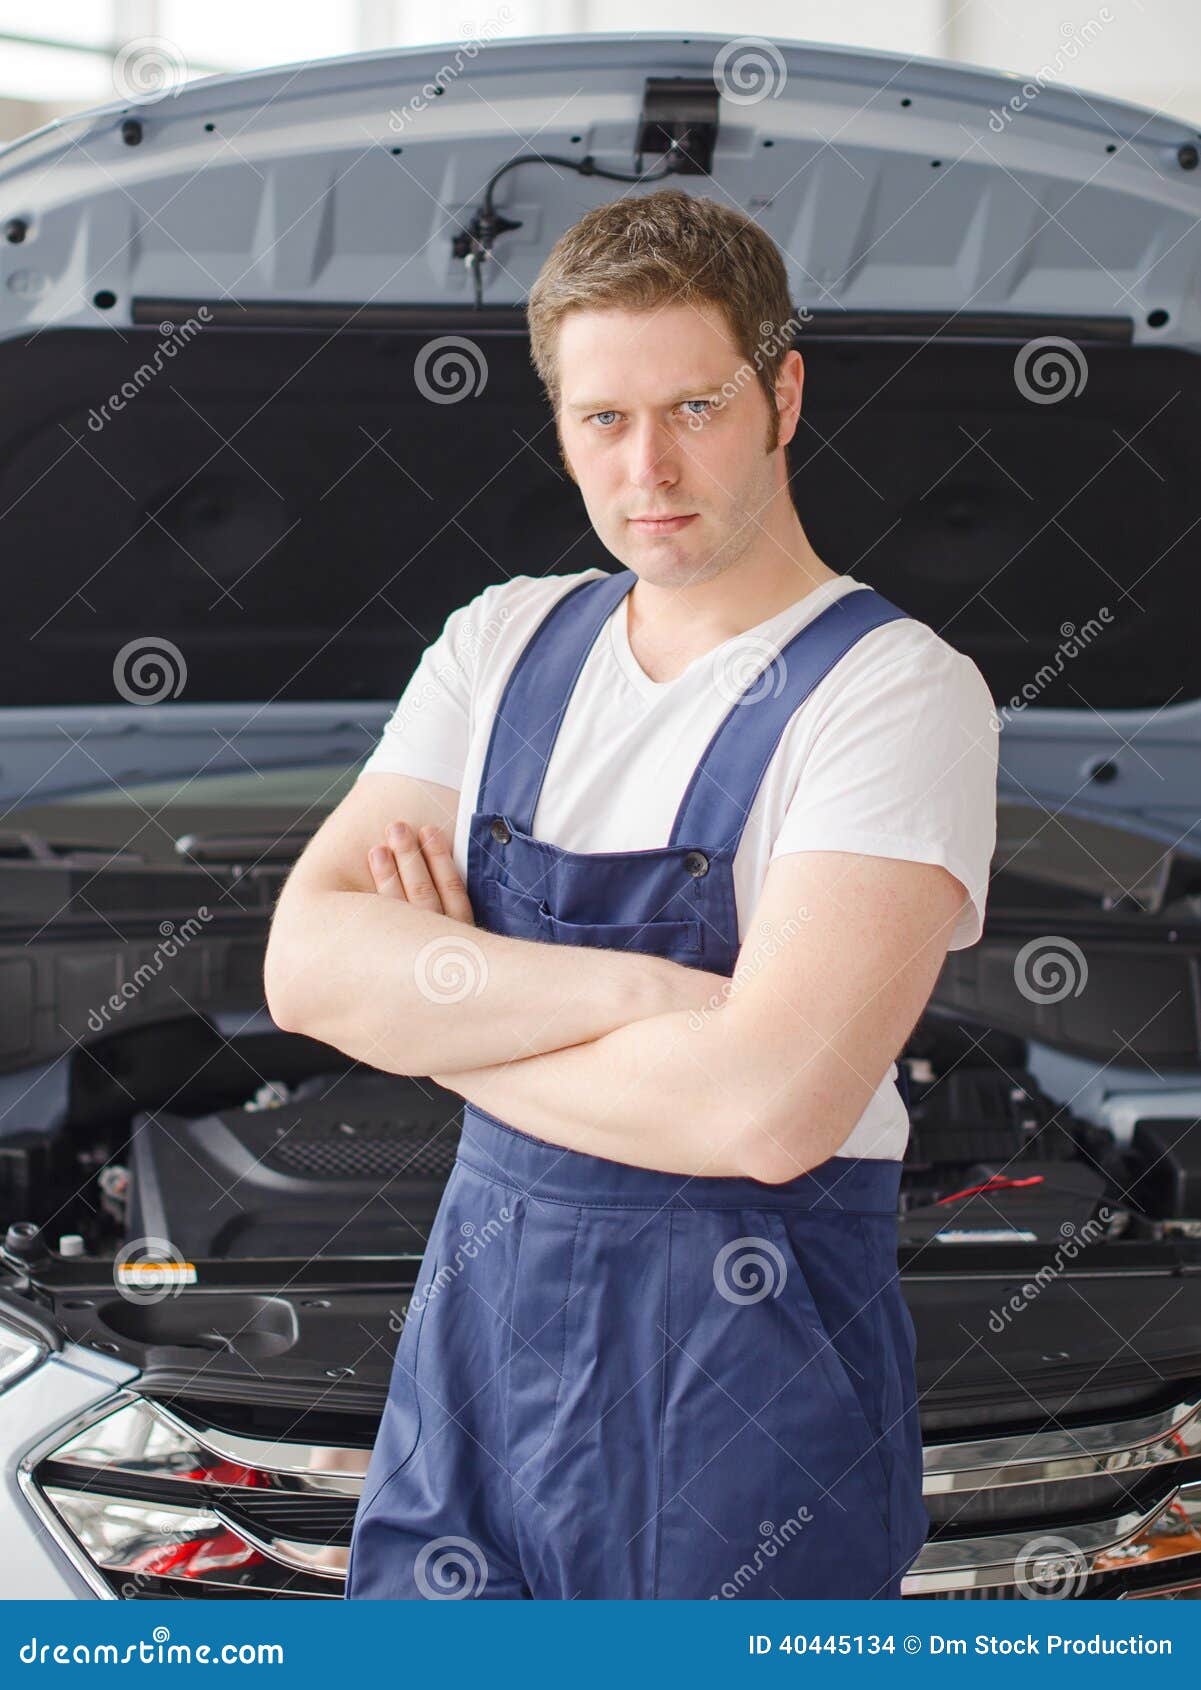 Young Handsome Mechanic Stock